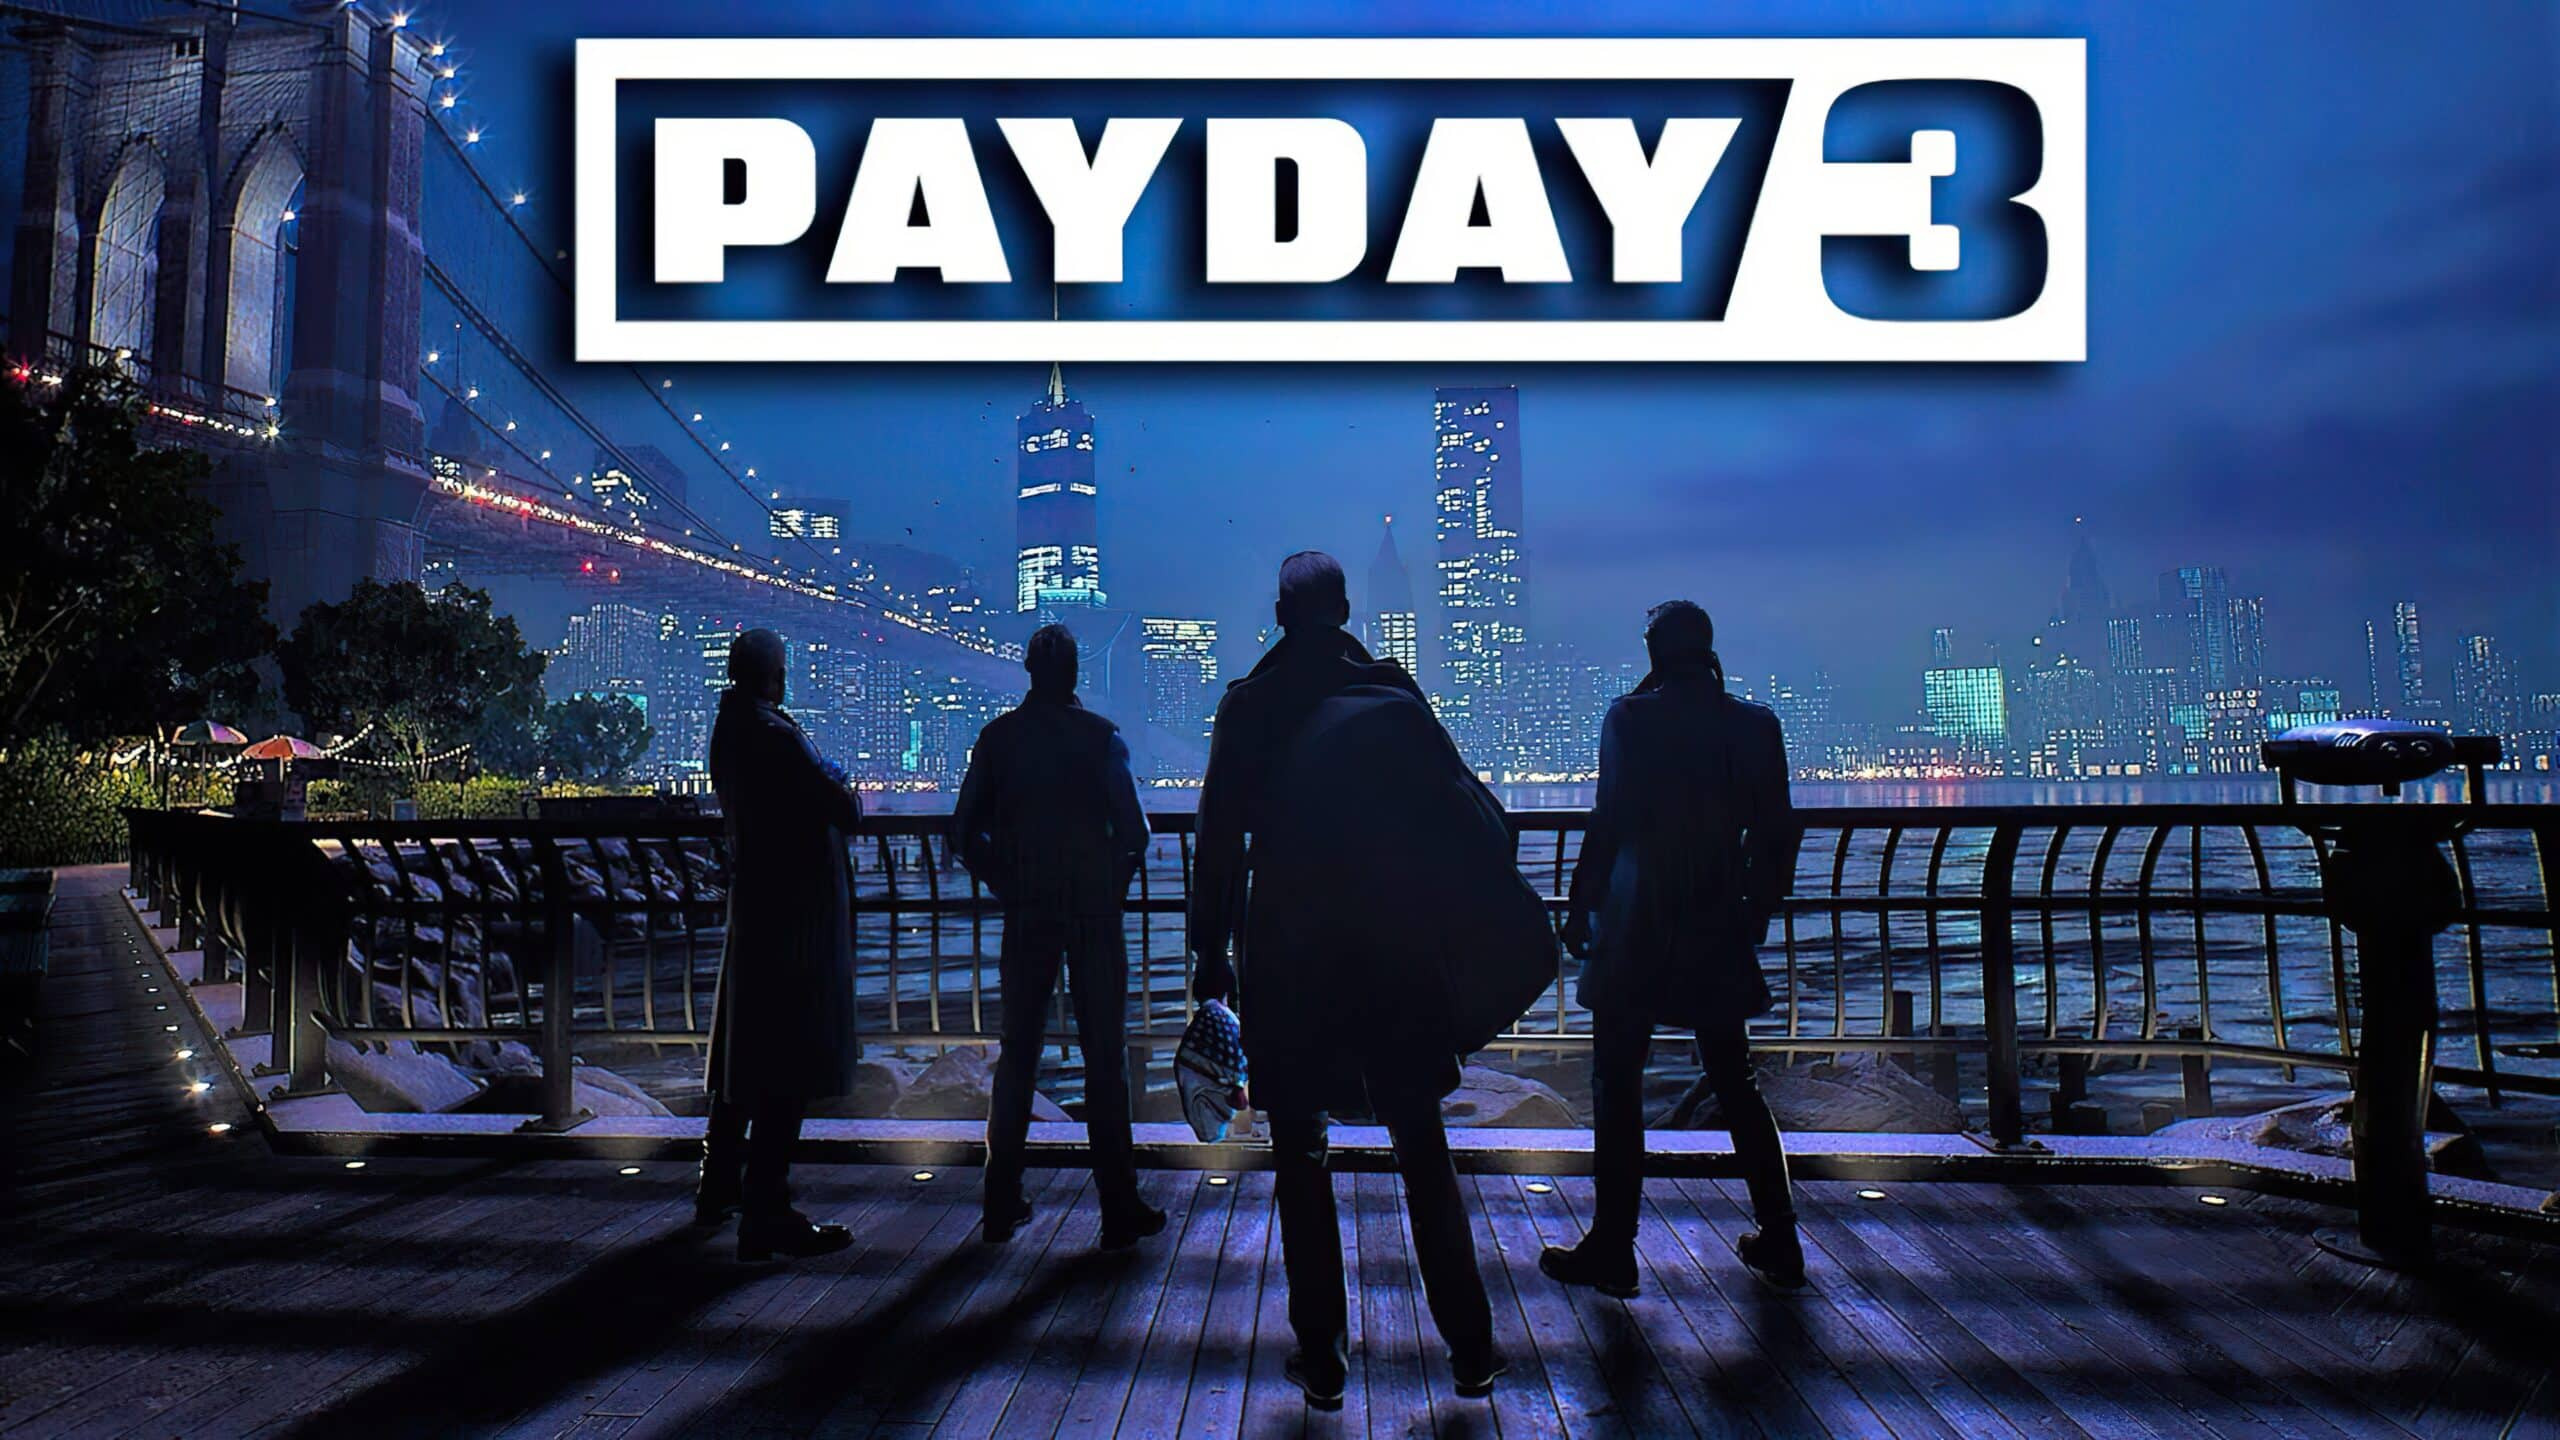 PAYDAY 3: Early Access and full release date and times, when can